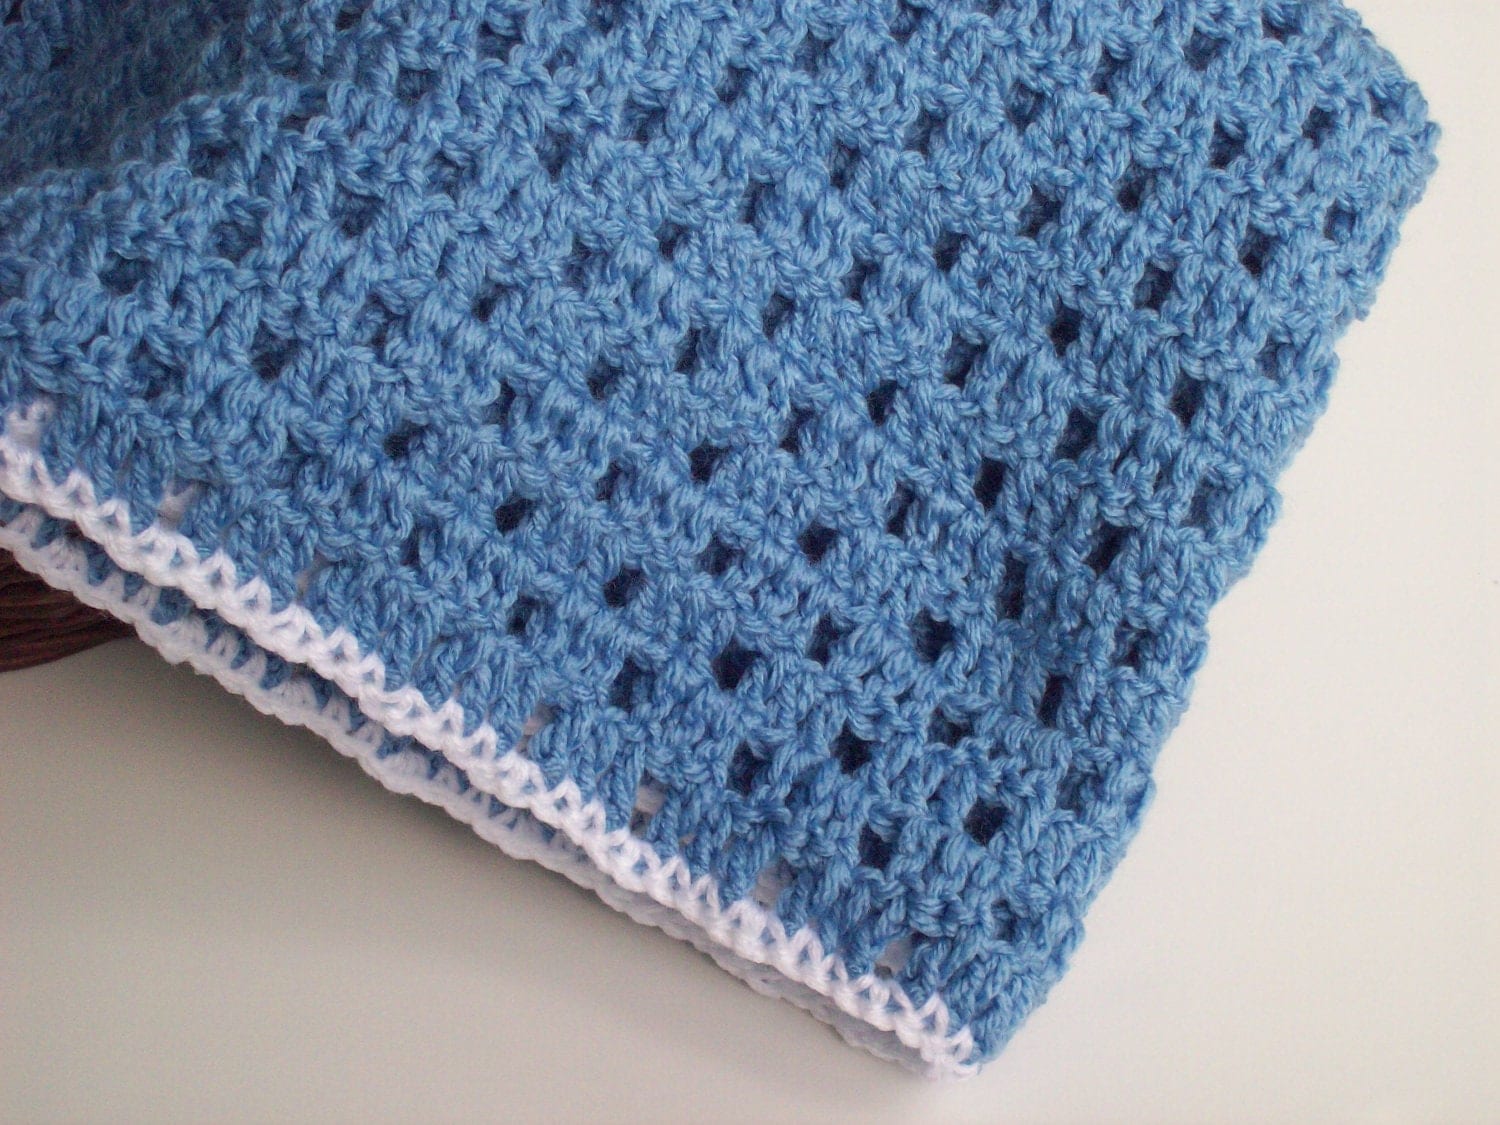 Crochet Blue Baby Blanket with White Trim by Misspamsliltreasures